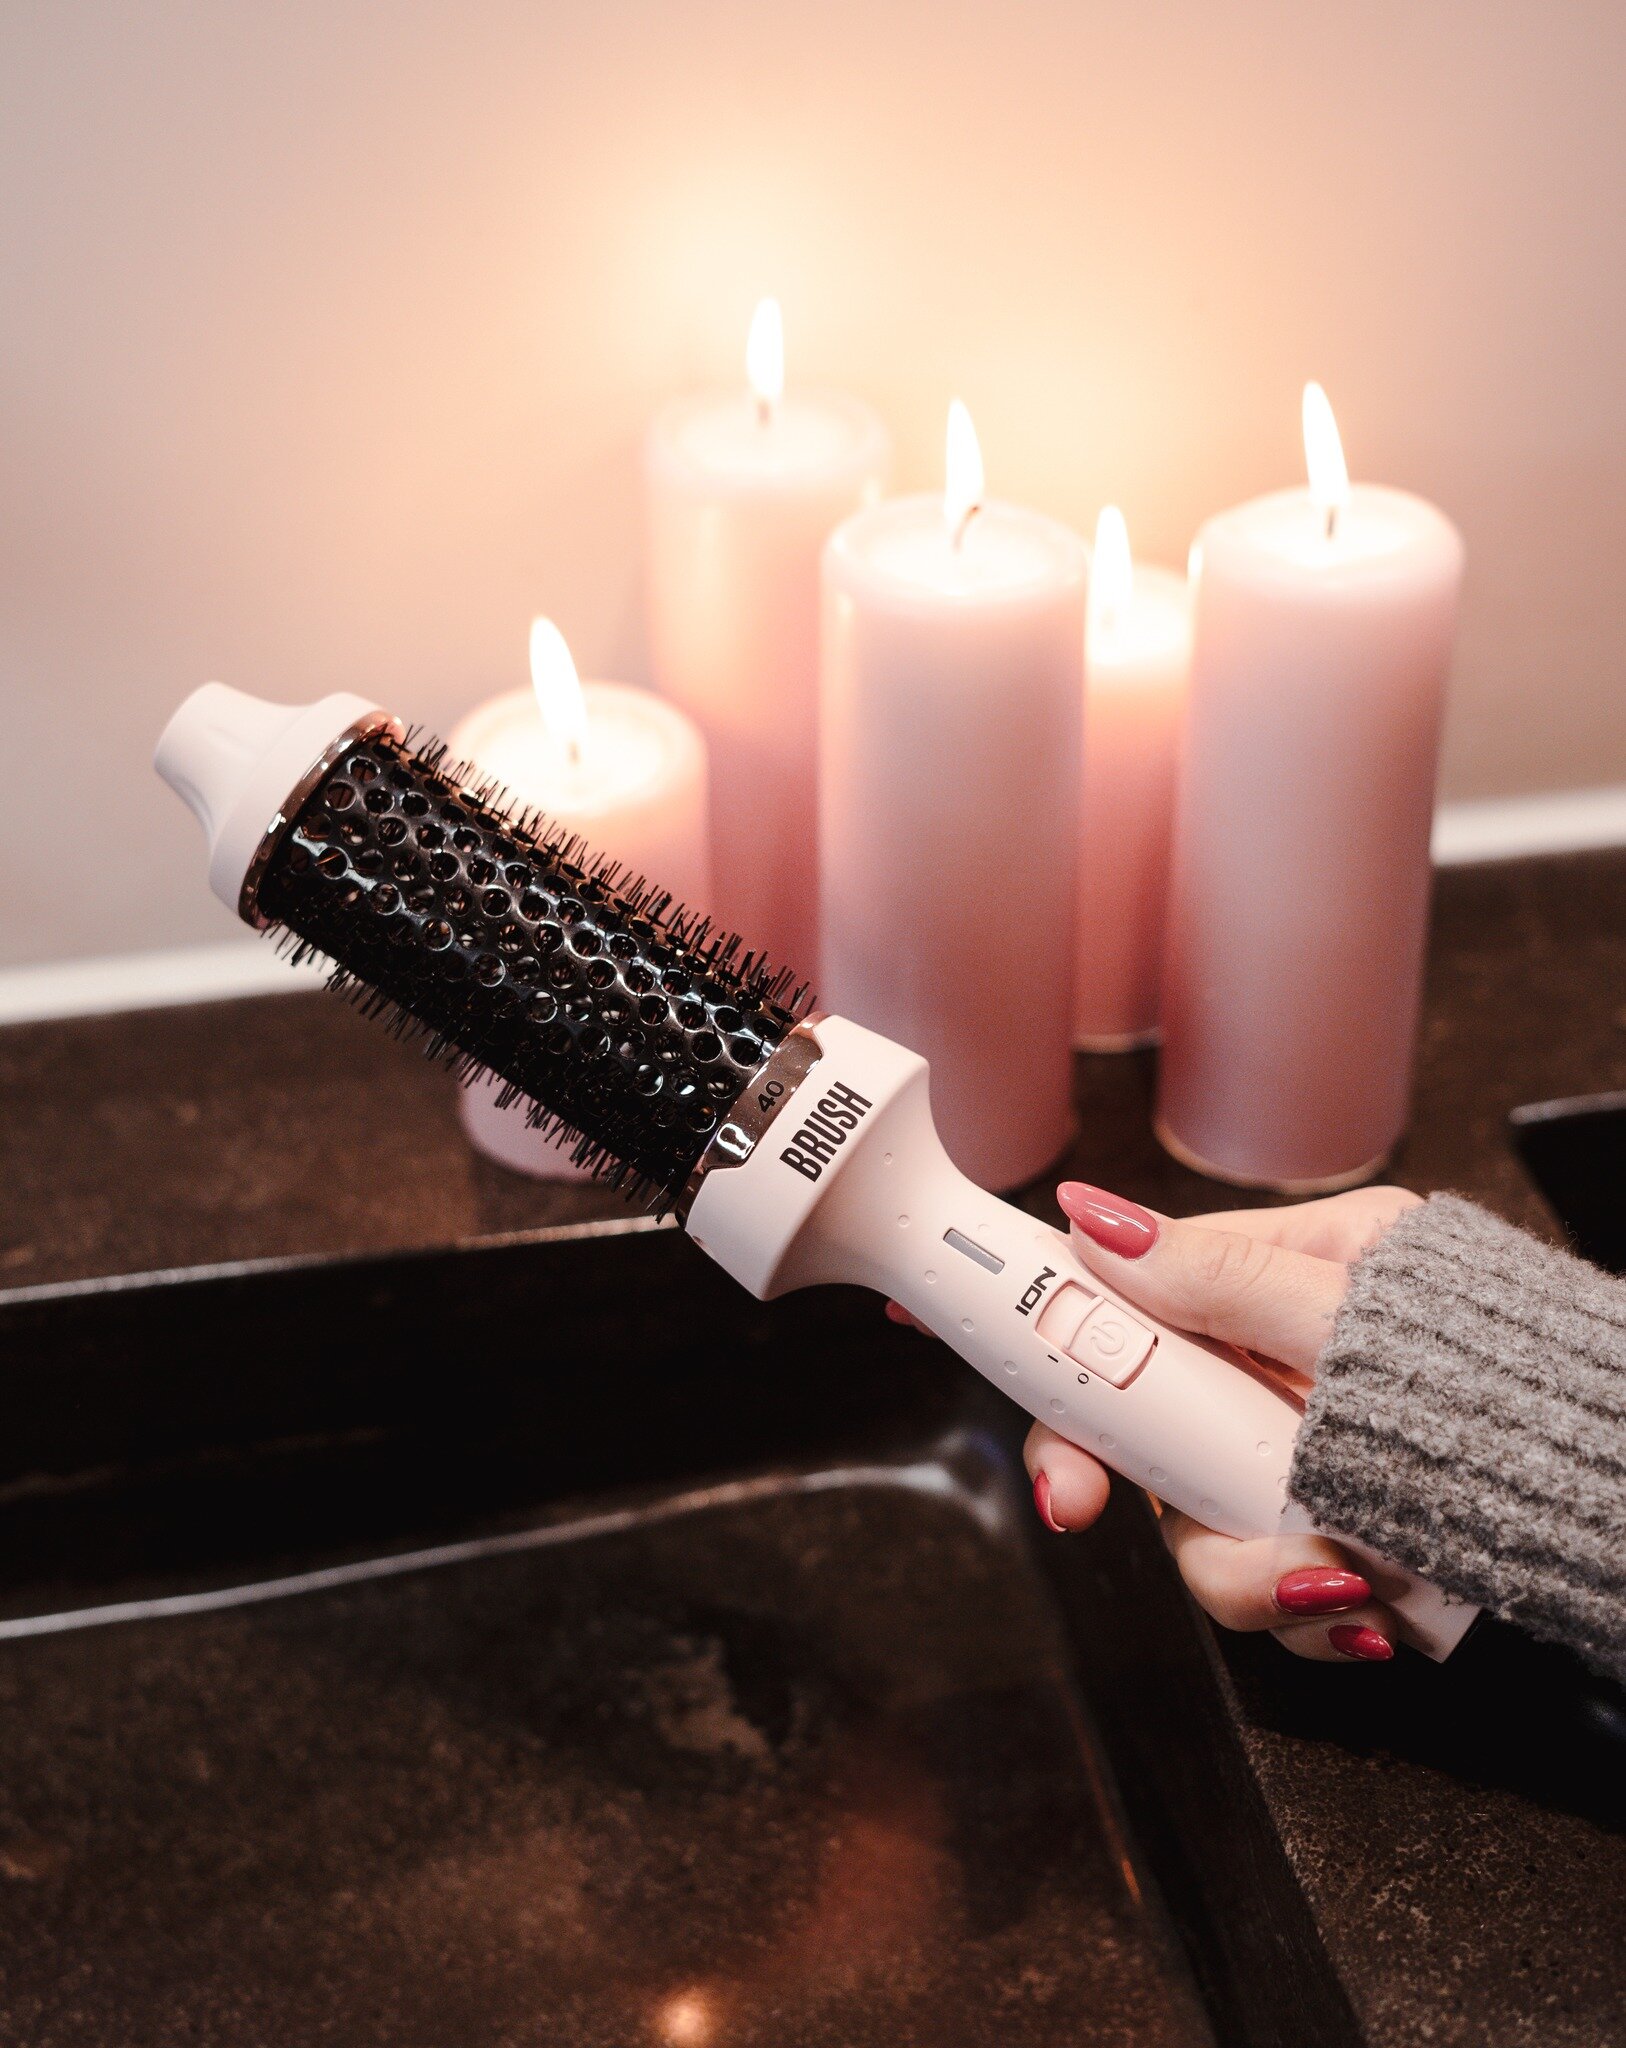 Blowout dreams and bathroom scenes &ndash; candles and our BRUSH make the magic happen 🔮

Photo: @thesassagency 💗